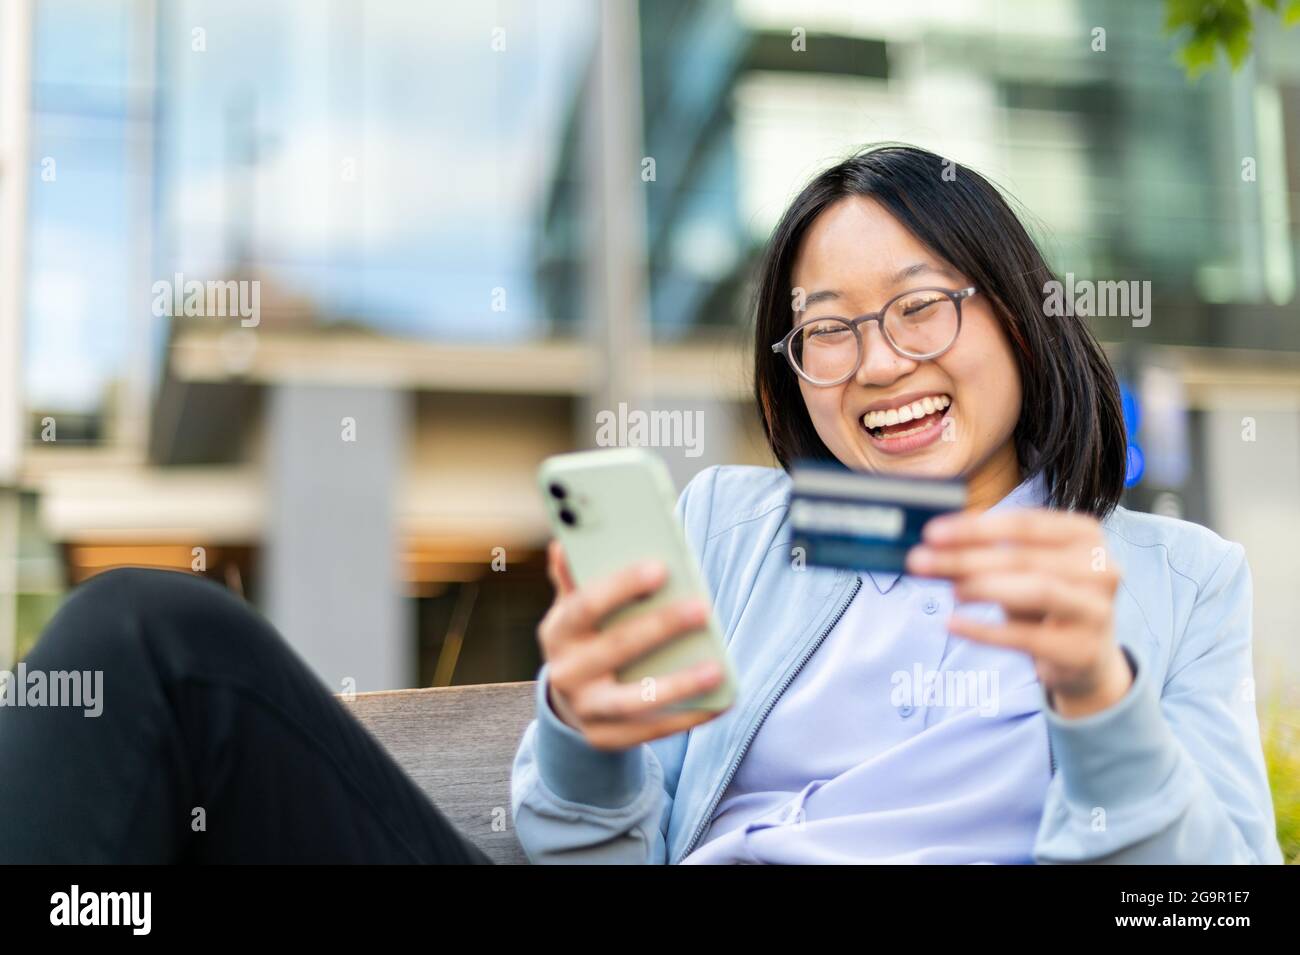 Happy young woman using cell phone to make mobile transaction Stock Photo